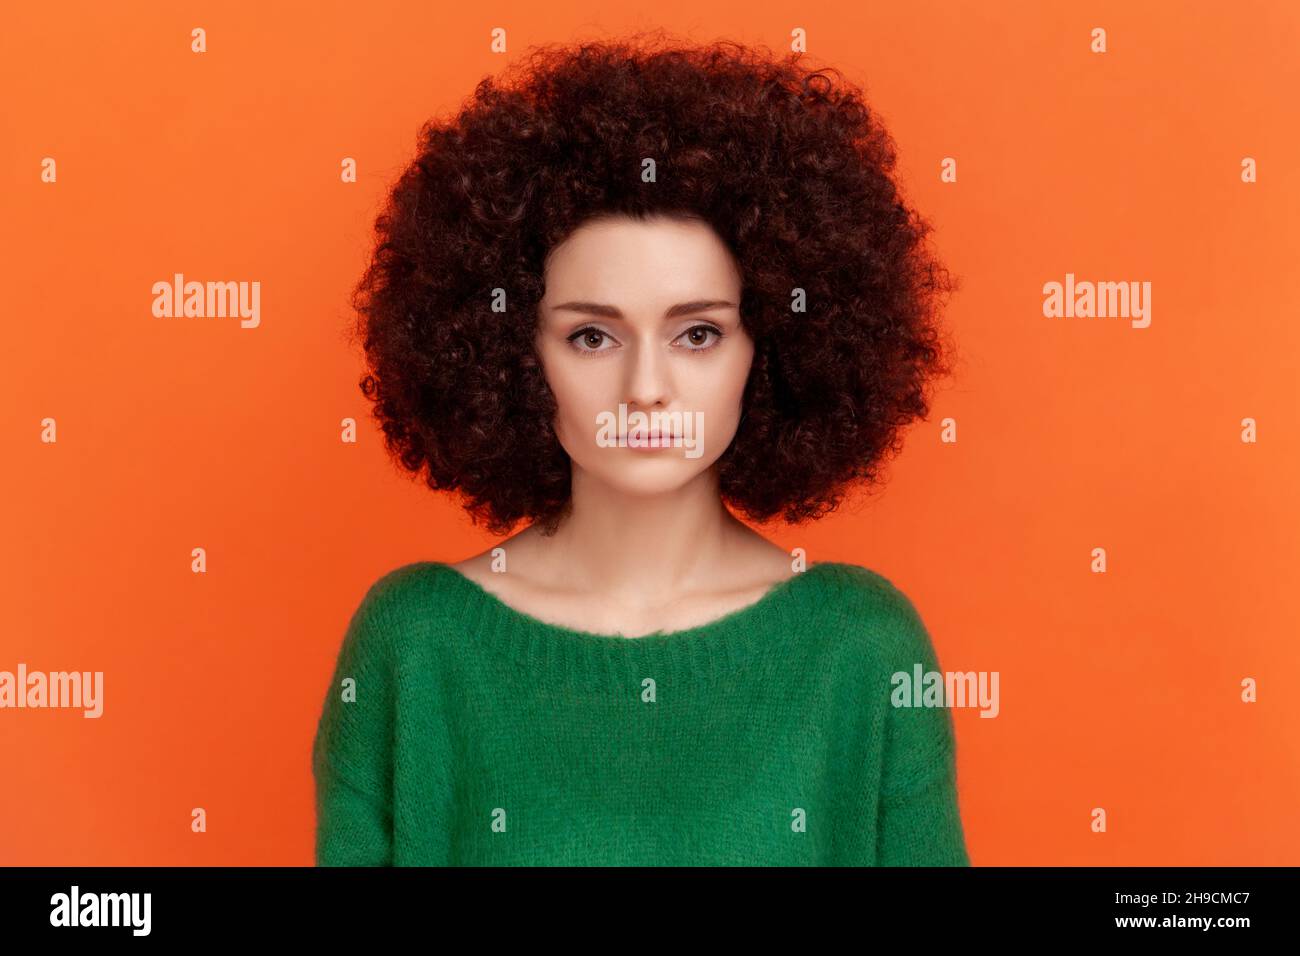 Portrait of serious strict woman with Afro hairstyle wearing green casual style sweater looking at camera with assertive facial expression. Indoor studio shot isolated on orange background. Stock Photo